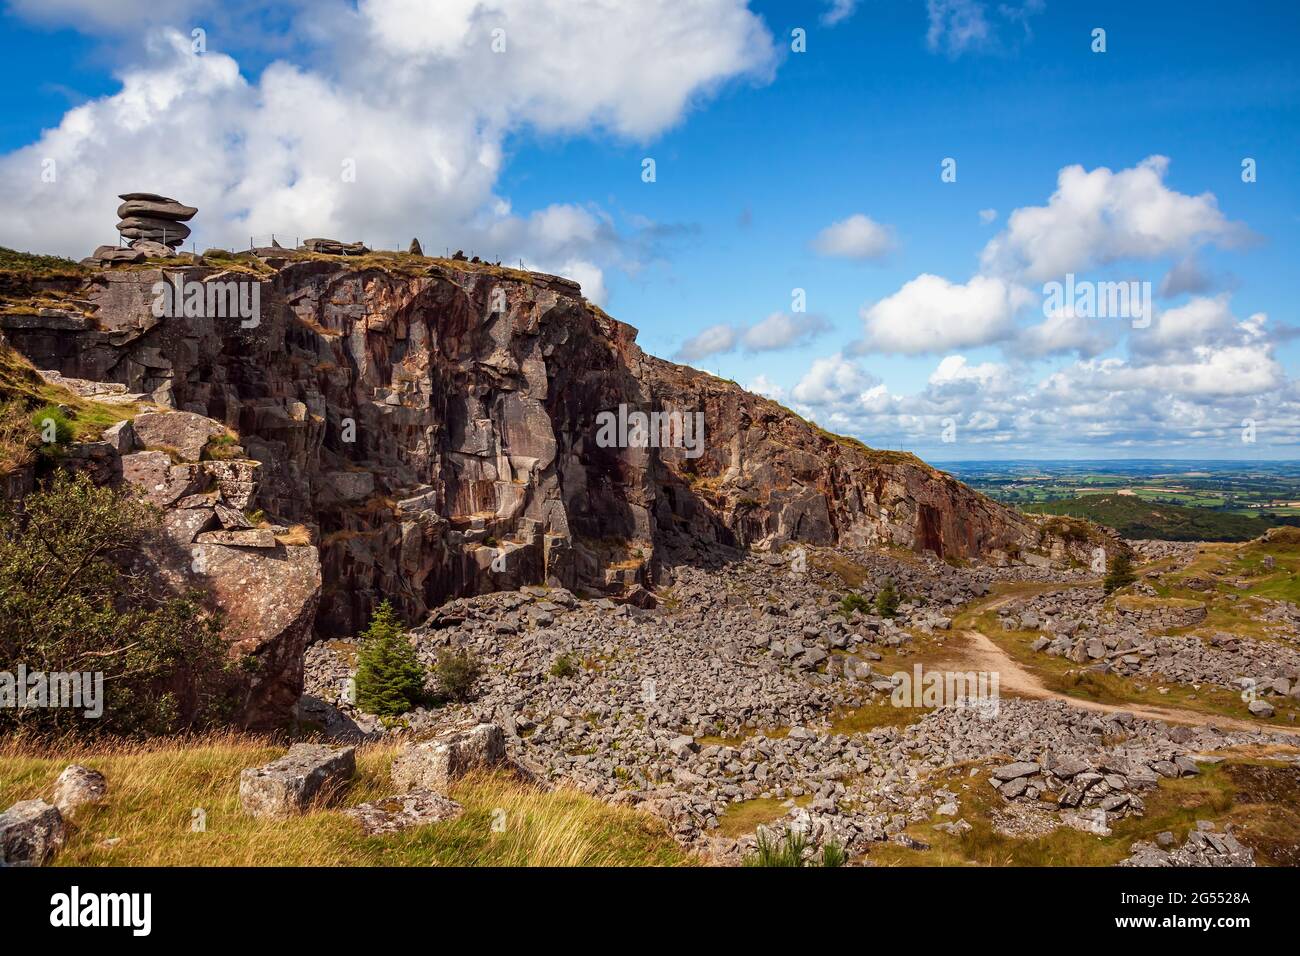 The Cheesewring natural rock formation seems to be balanced precariously over the disused Cheesewring Quarry at Stowe's Hill, Bodmin Moor in Cornwall. Stock Photo